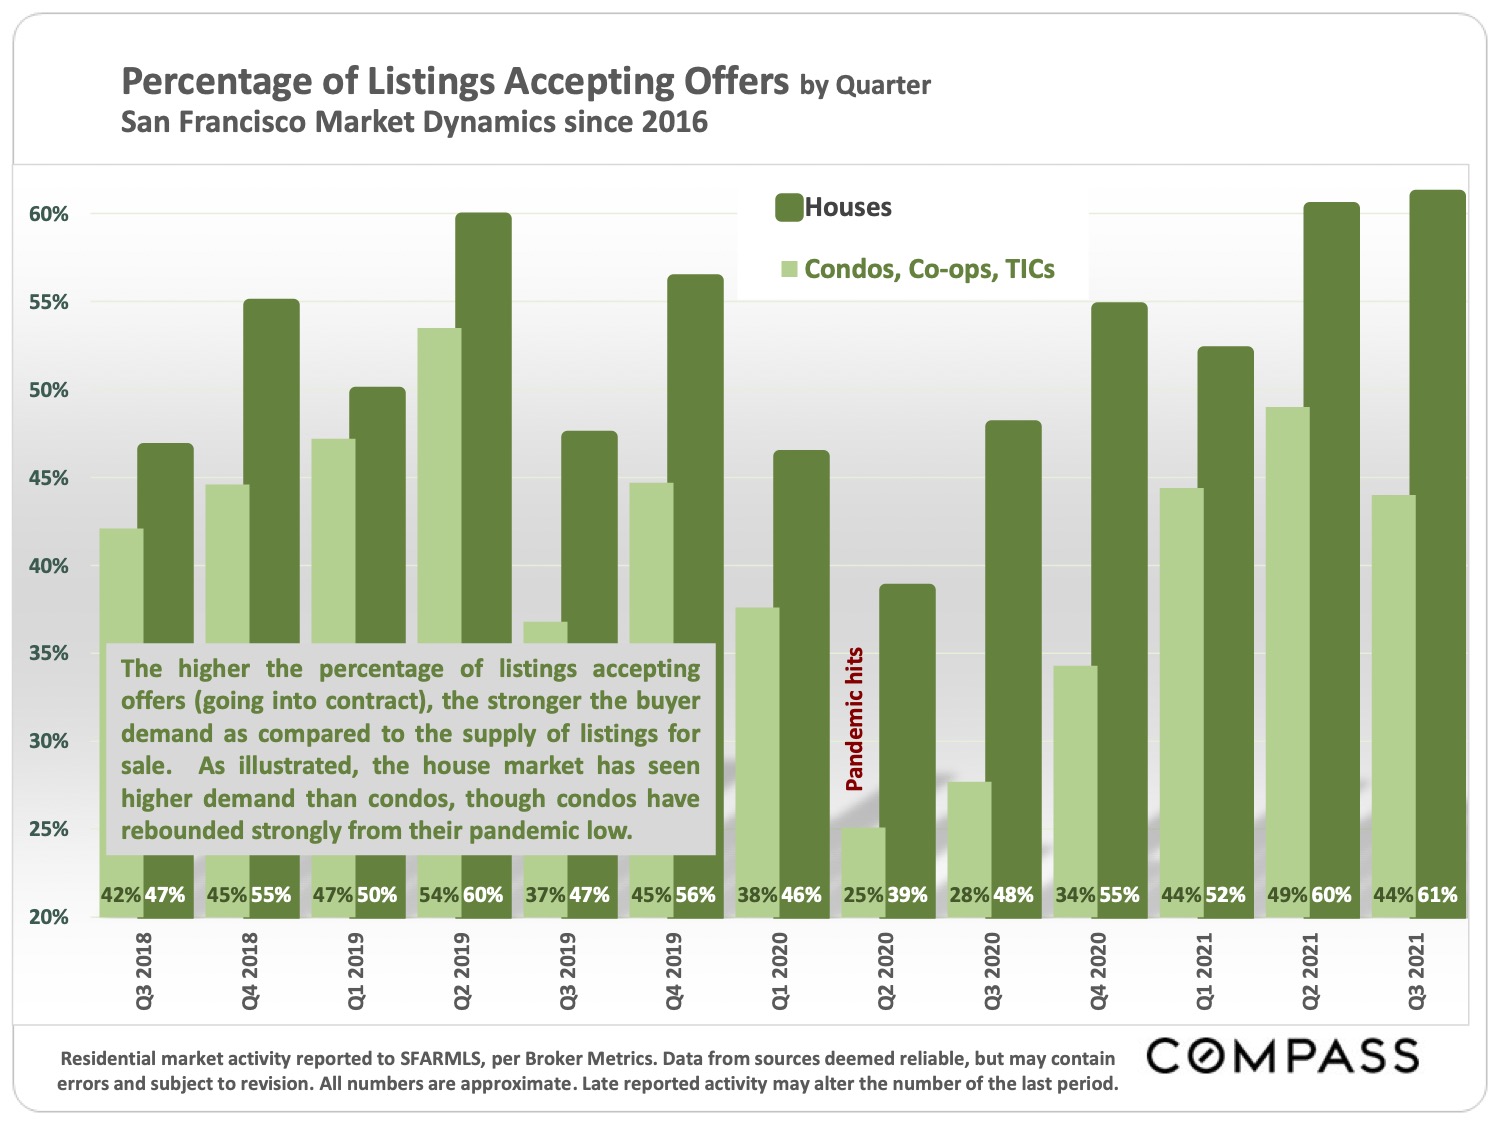 Percentage of Listings Accepting Offers - San Francisco Market Dynamics Since 2016